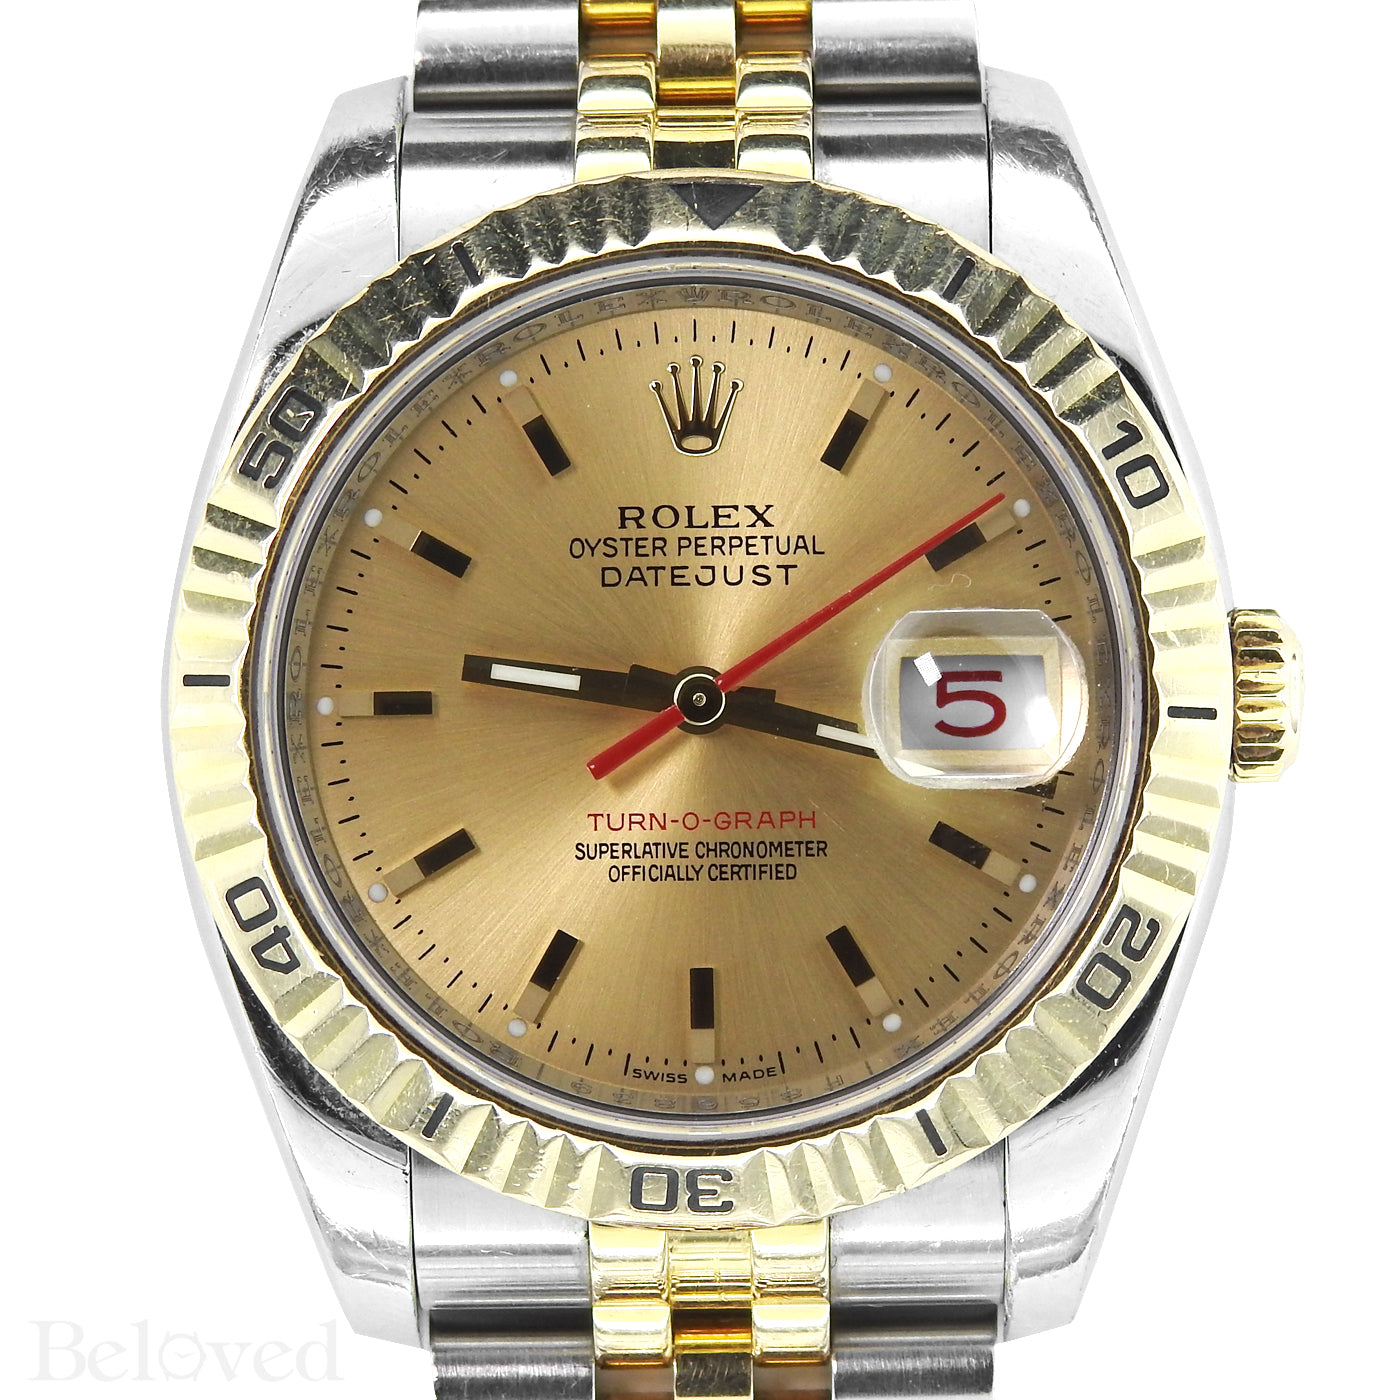 Rolex Datejust Turnograph 116263 Champagne Dial with Red Seconds Hand Image 3